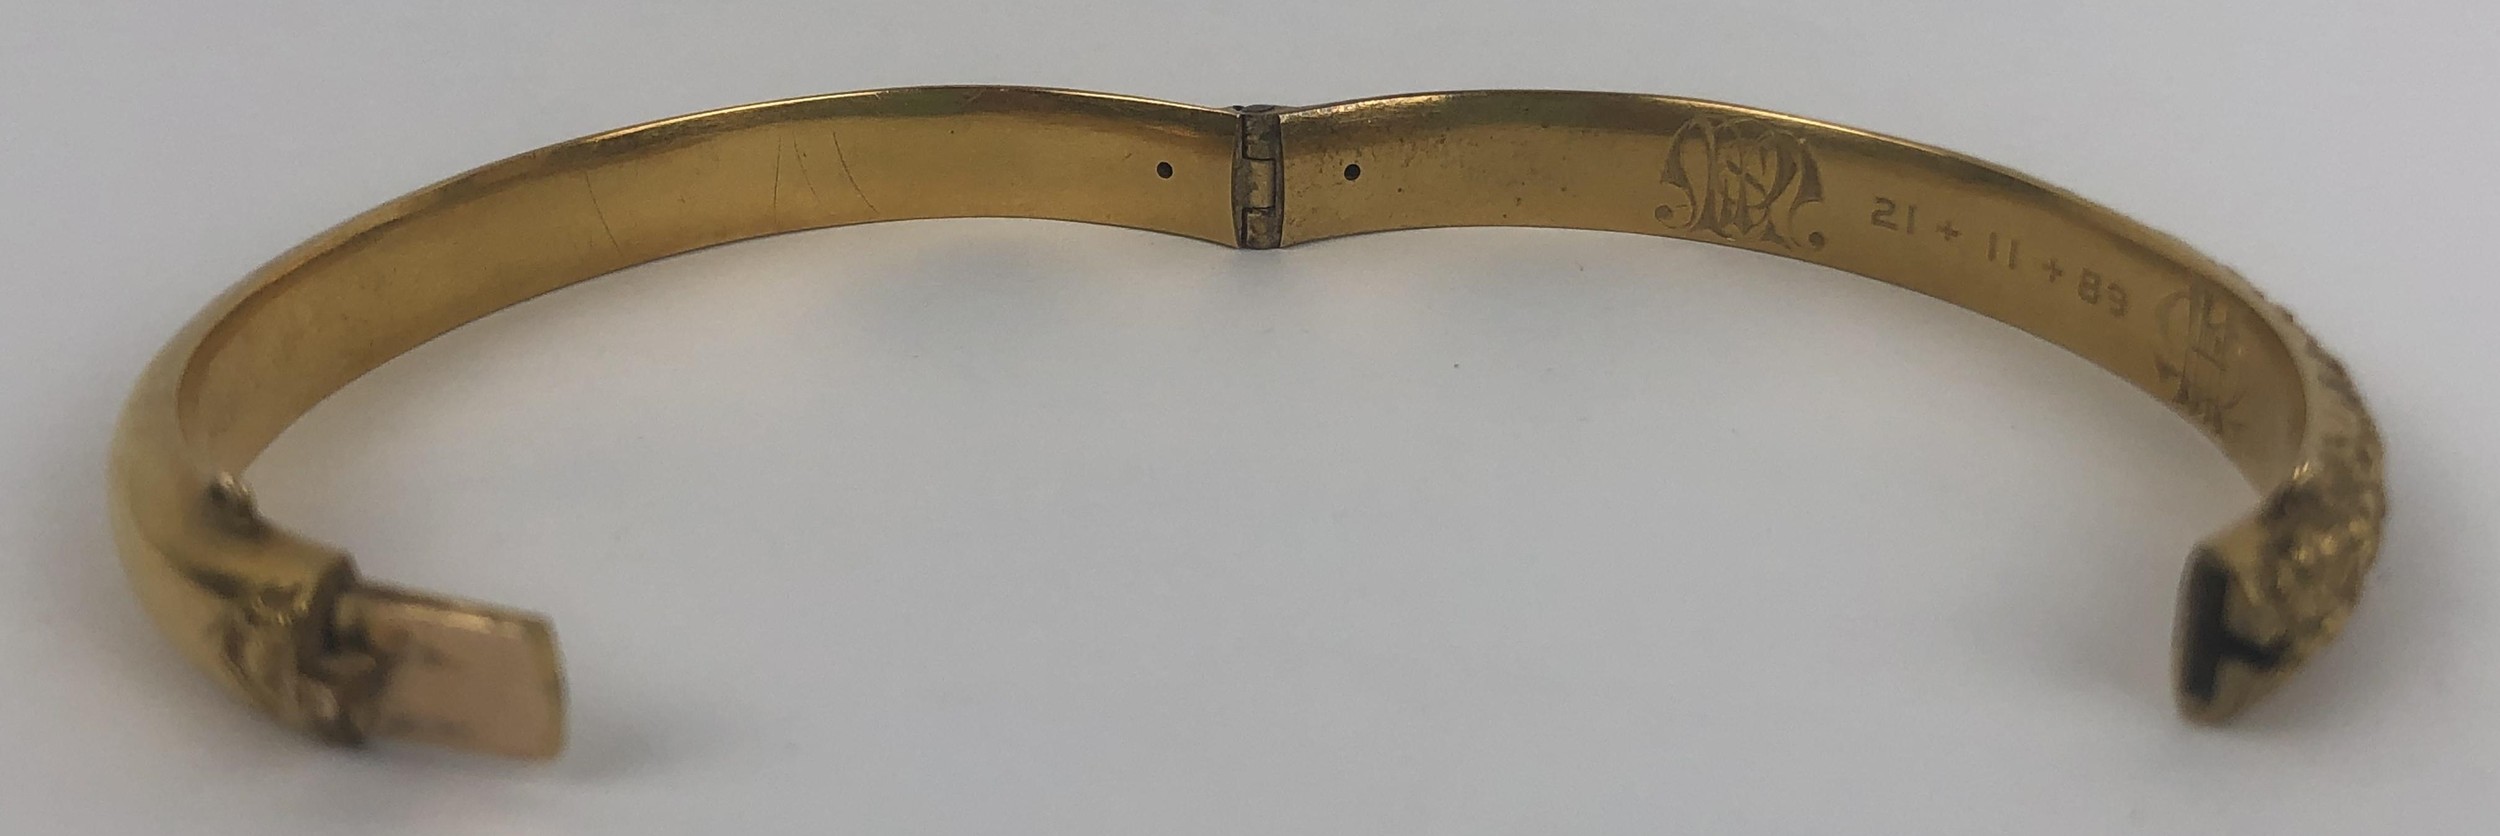 A Victorian 15ct gold hinged bangle, engraved with two sets of monogrammes and dated 21 11 89, 12. - Image 5 of 7